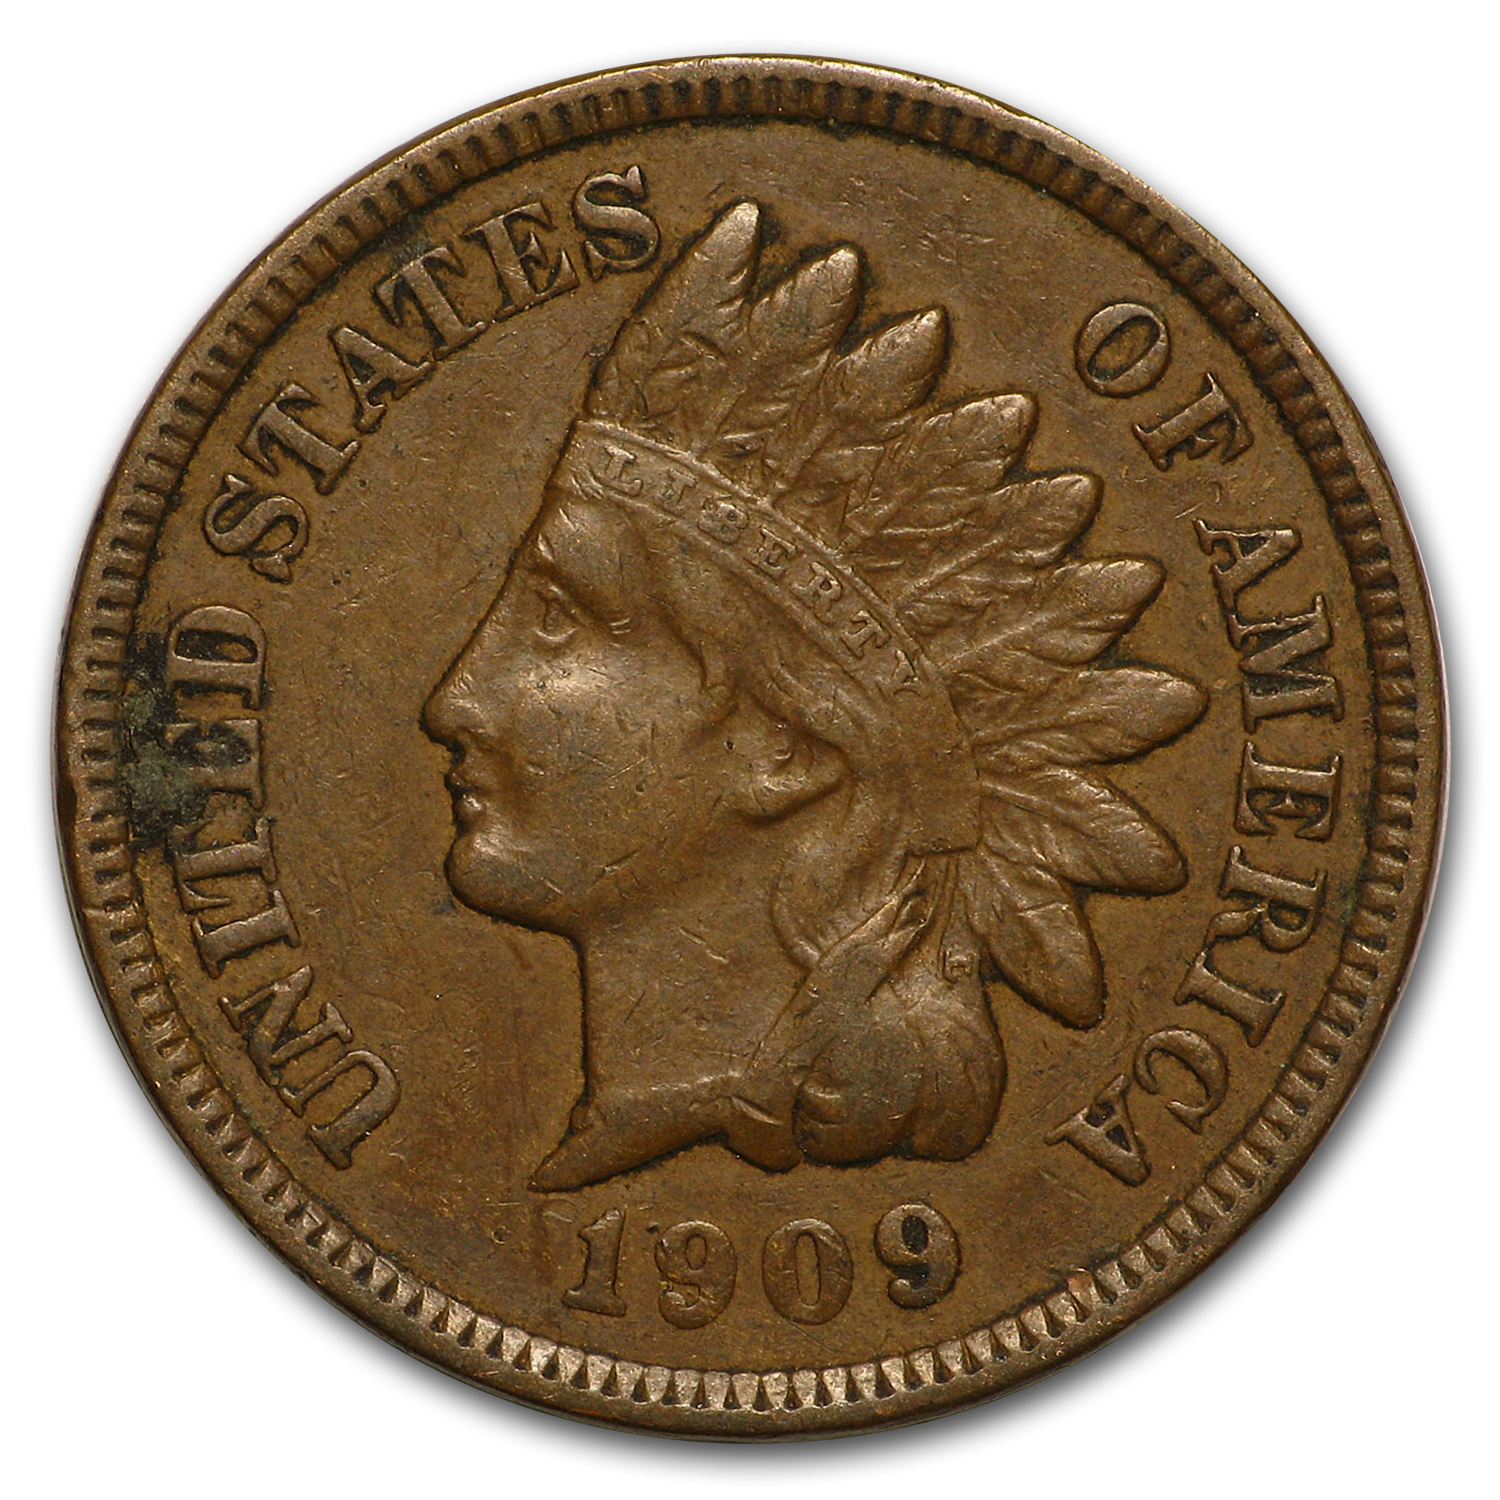 Buy 1909 Indian Head Cent XF